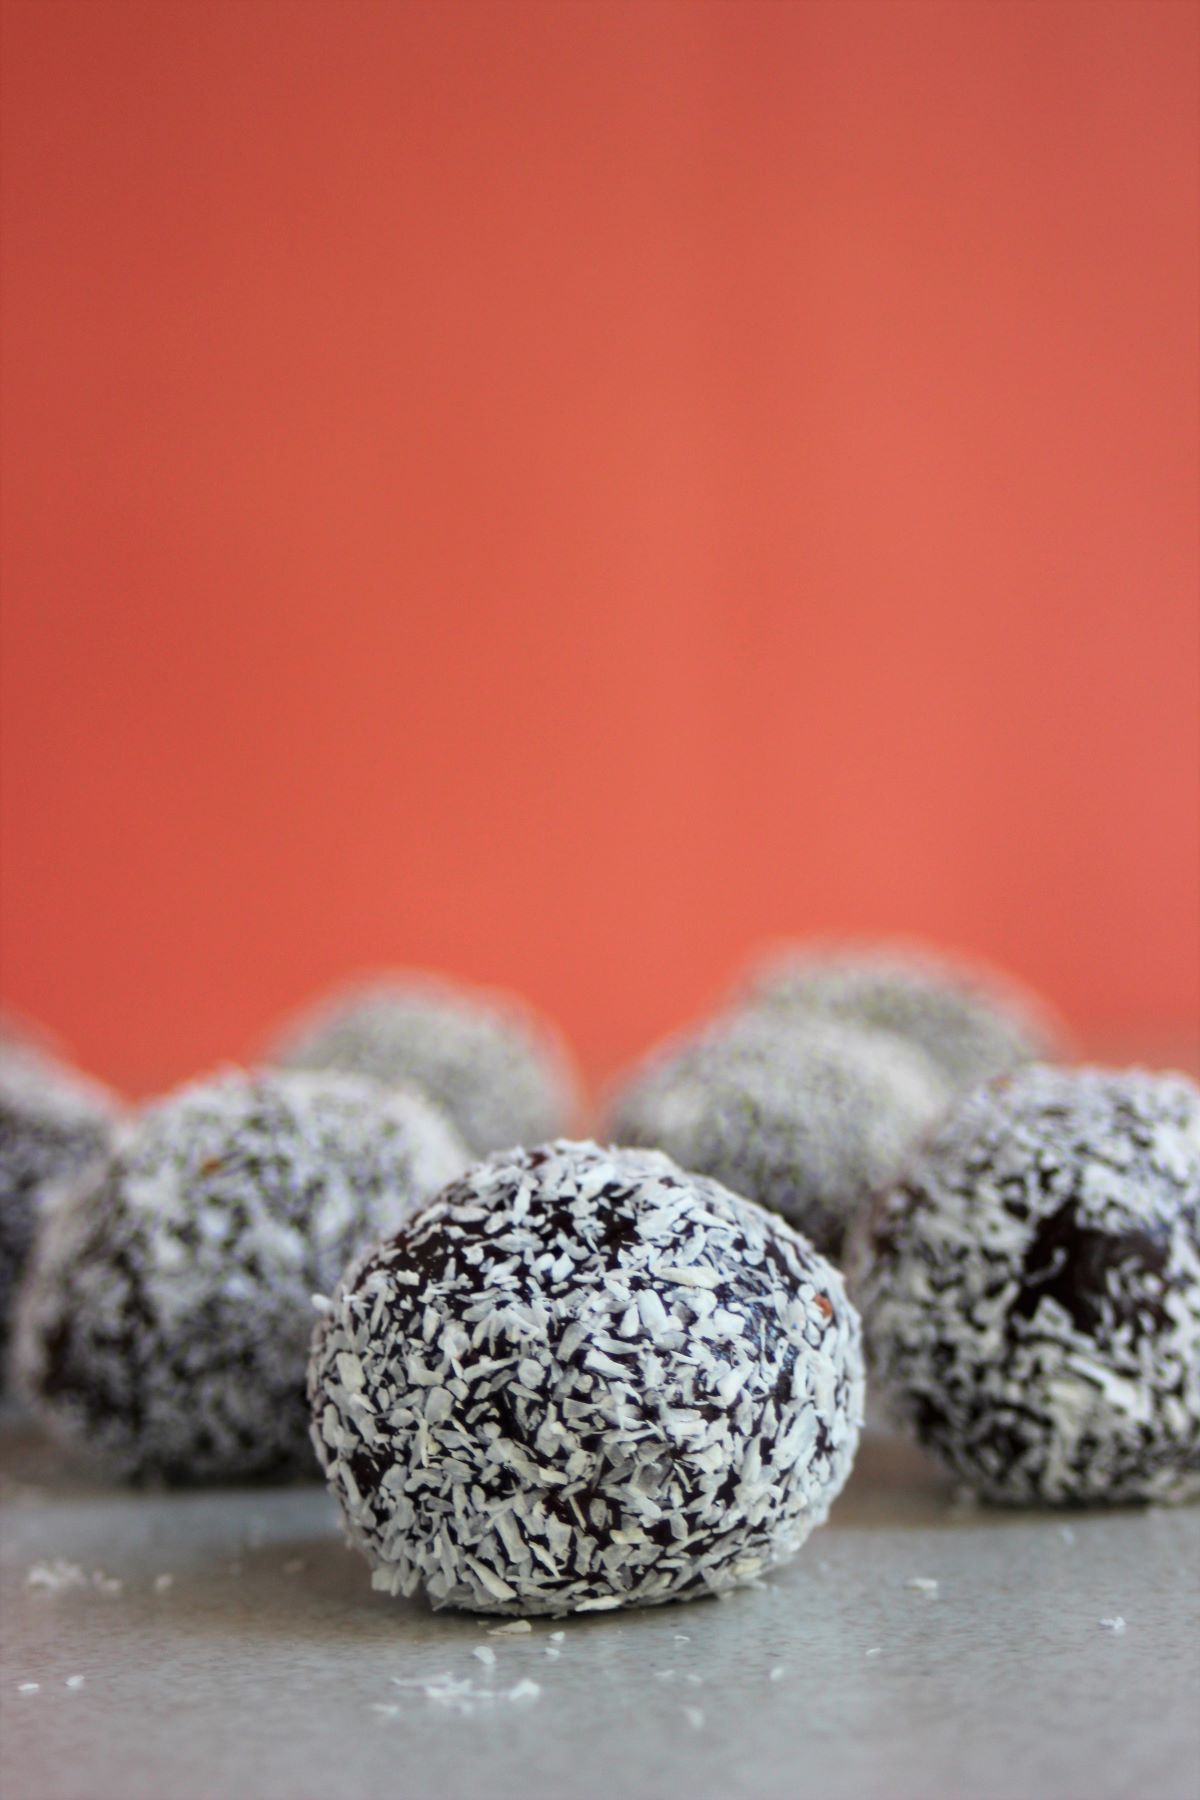 Brigadeiros with shredded coconut on a white surface and pink background.